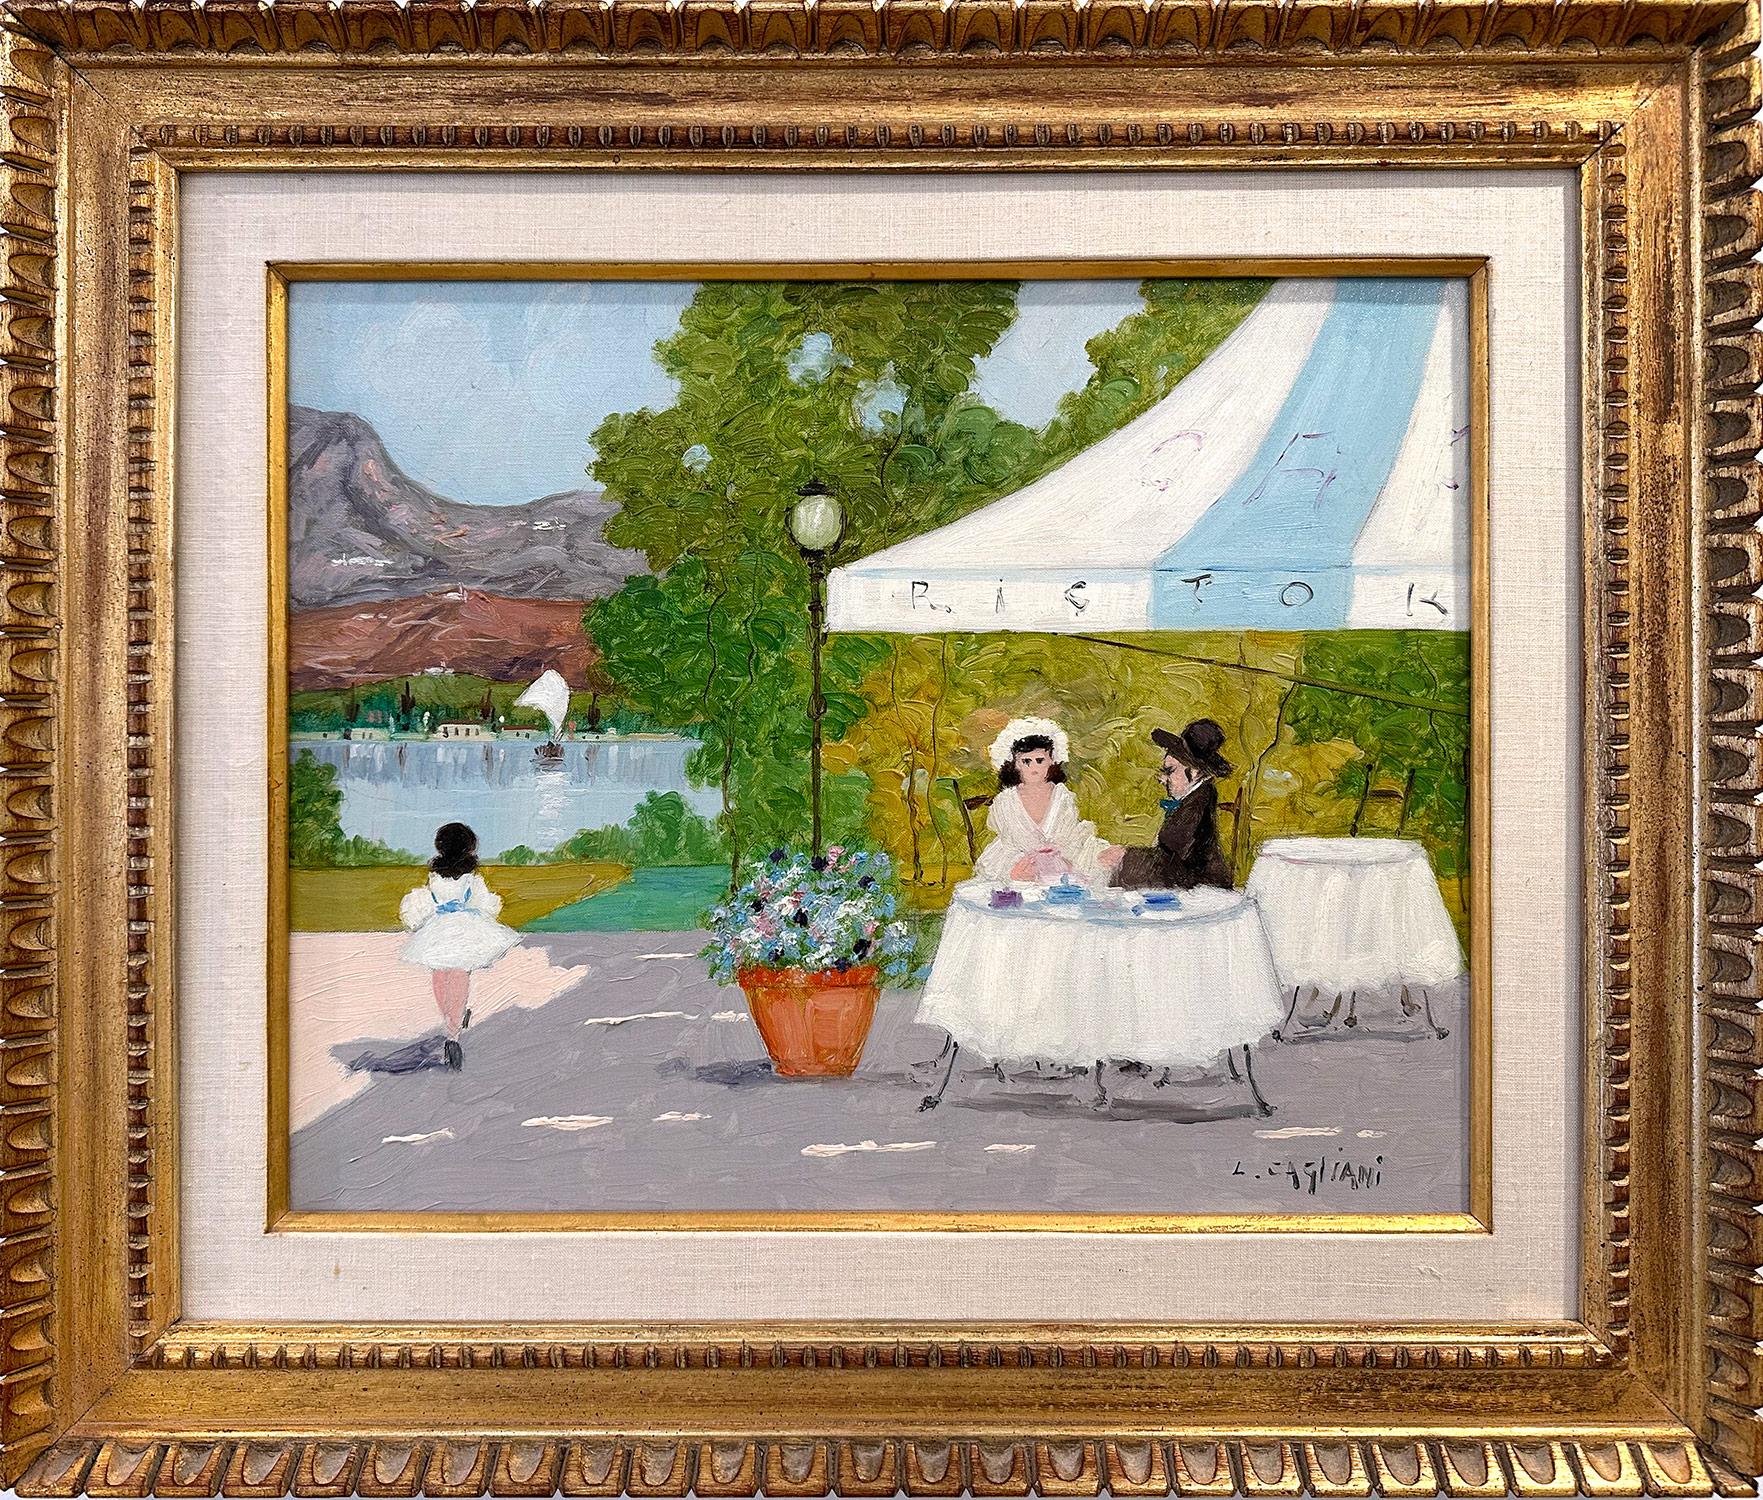 Luigi Cagliani Landscape Painting - "Cafe with Lakeside View of Lake Lugano" Impressionist Oil on Canvas Painting